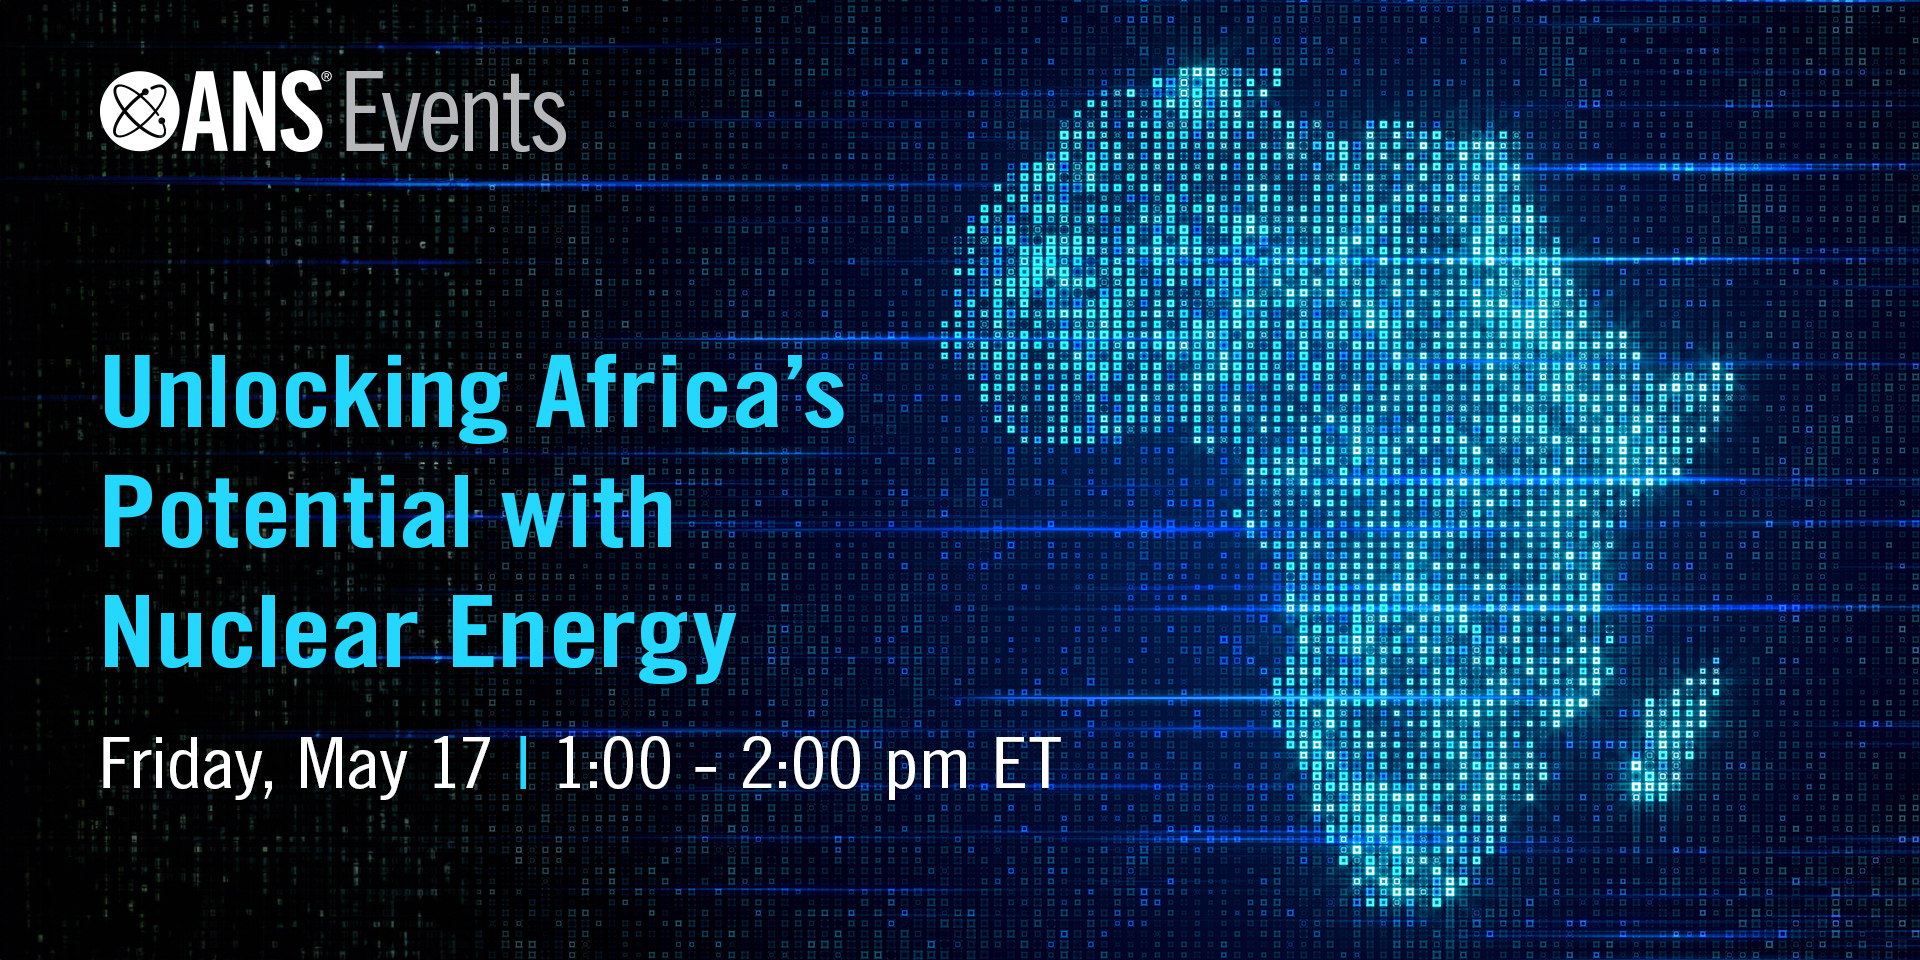 Hear about the future of nuclear in Africa